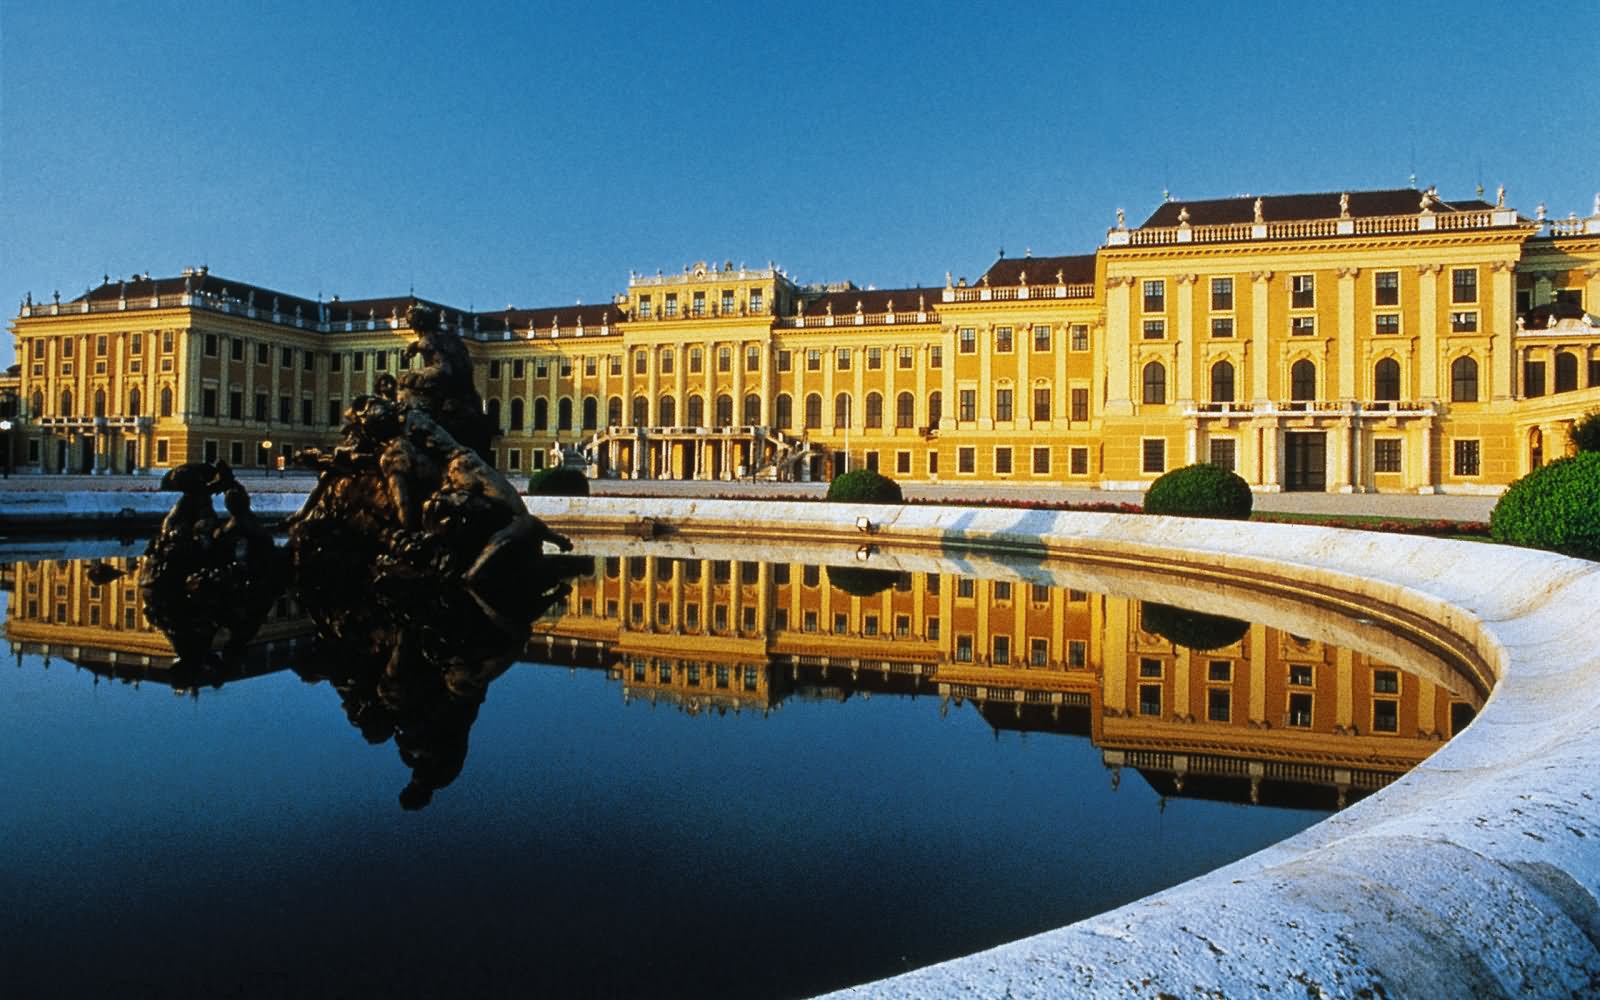 Side View Of The Schonbrunn Palace From The Fountain